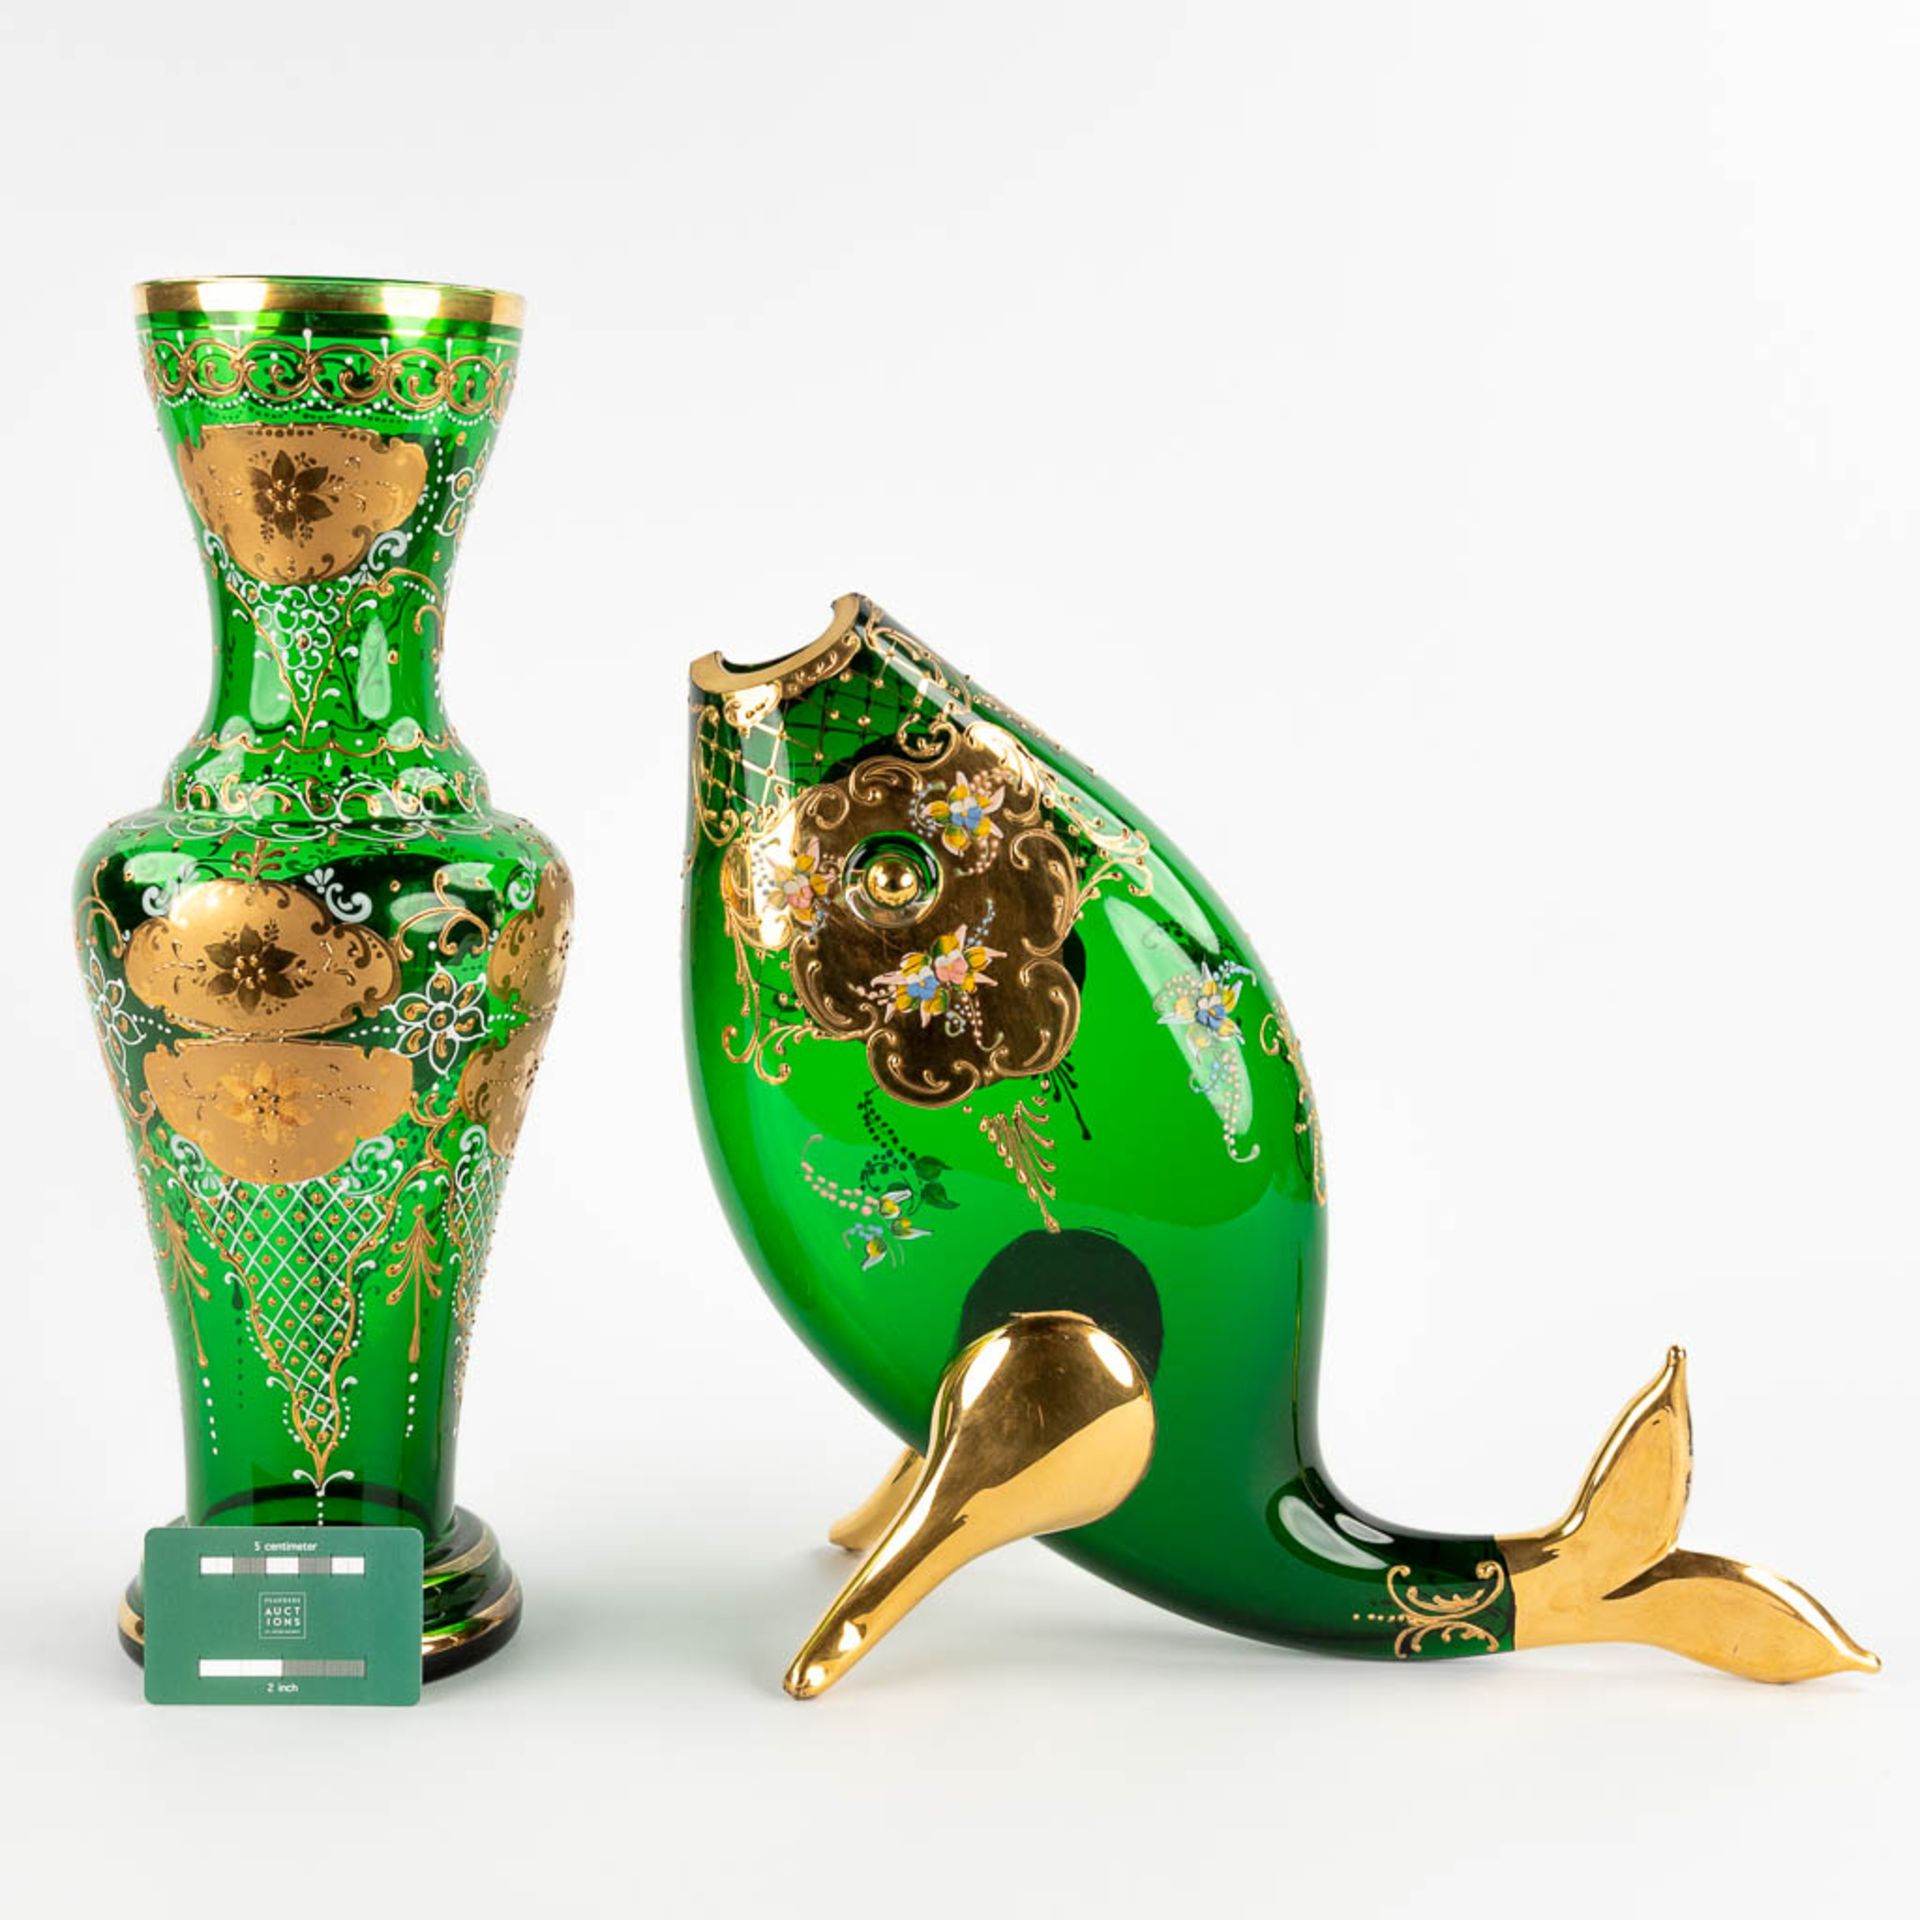 A fish and a vase, art glass, Murano, Italy. (H:44 x D:15 cm) - Image 2 of 21